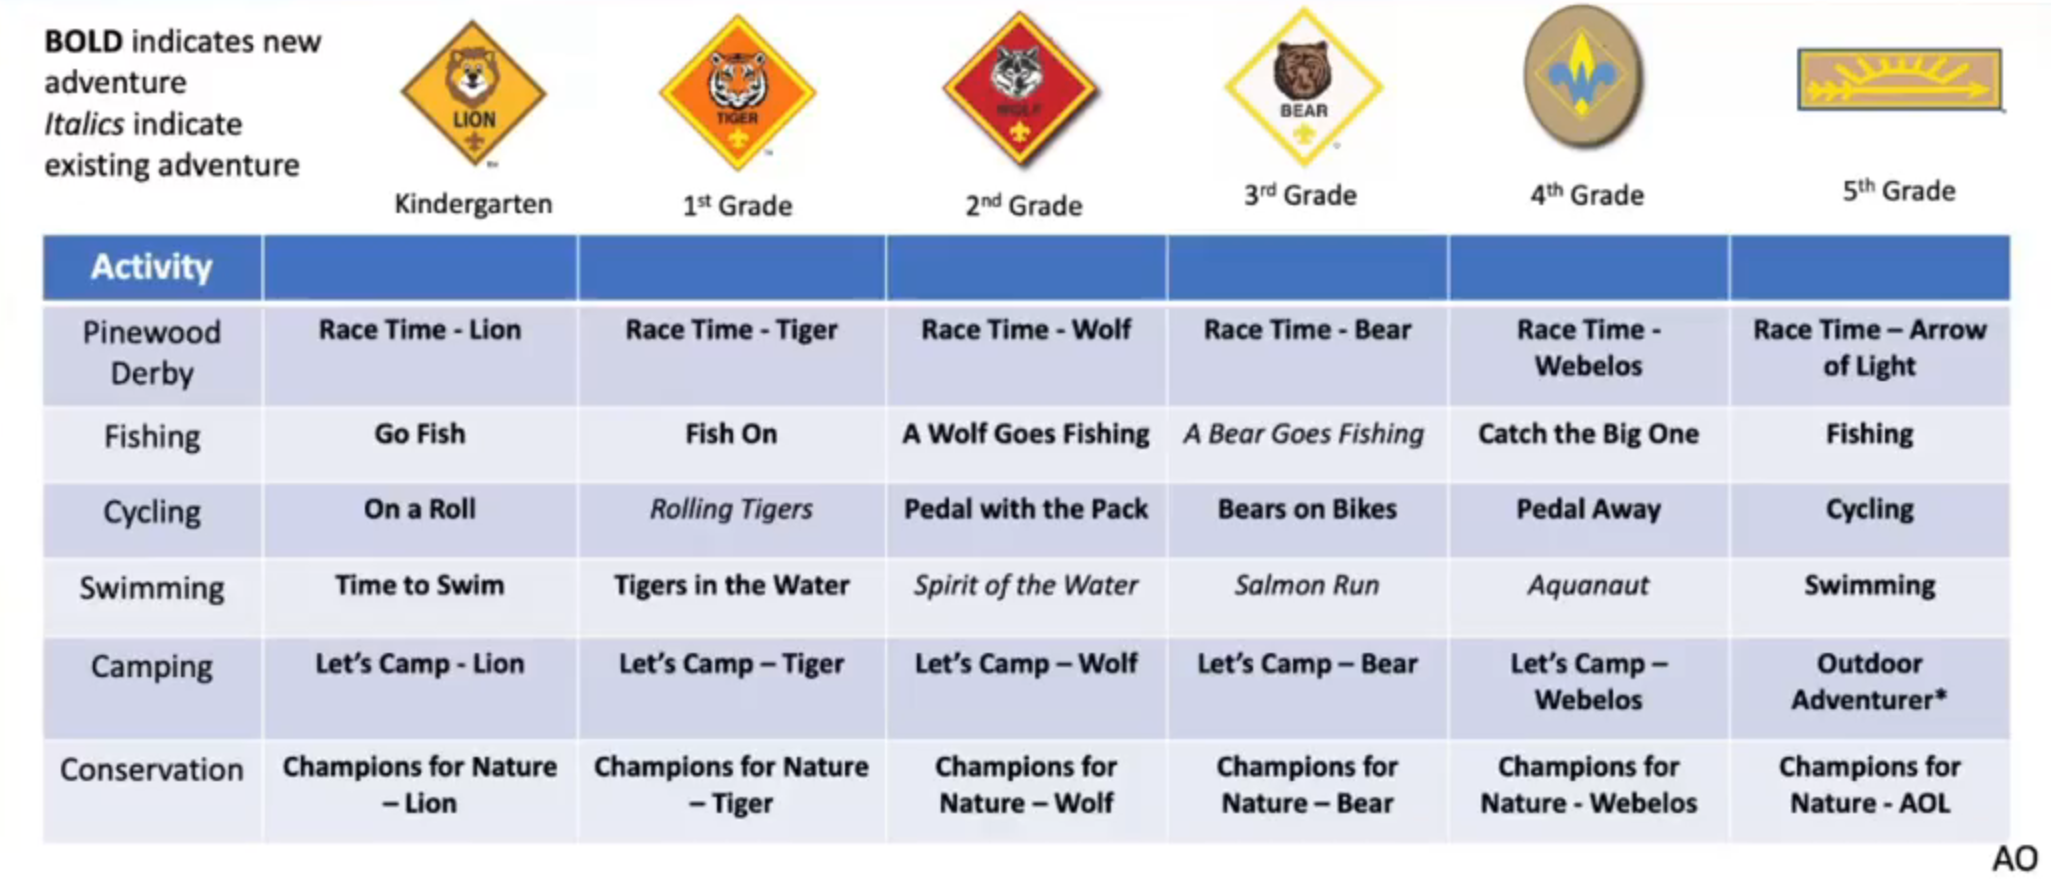 Cub Scout Program Updates 2024 - Adventures Available for All Ranks